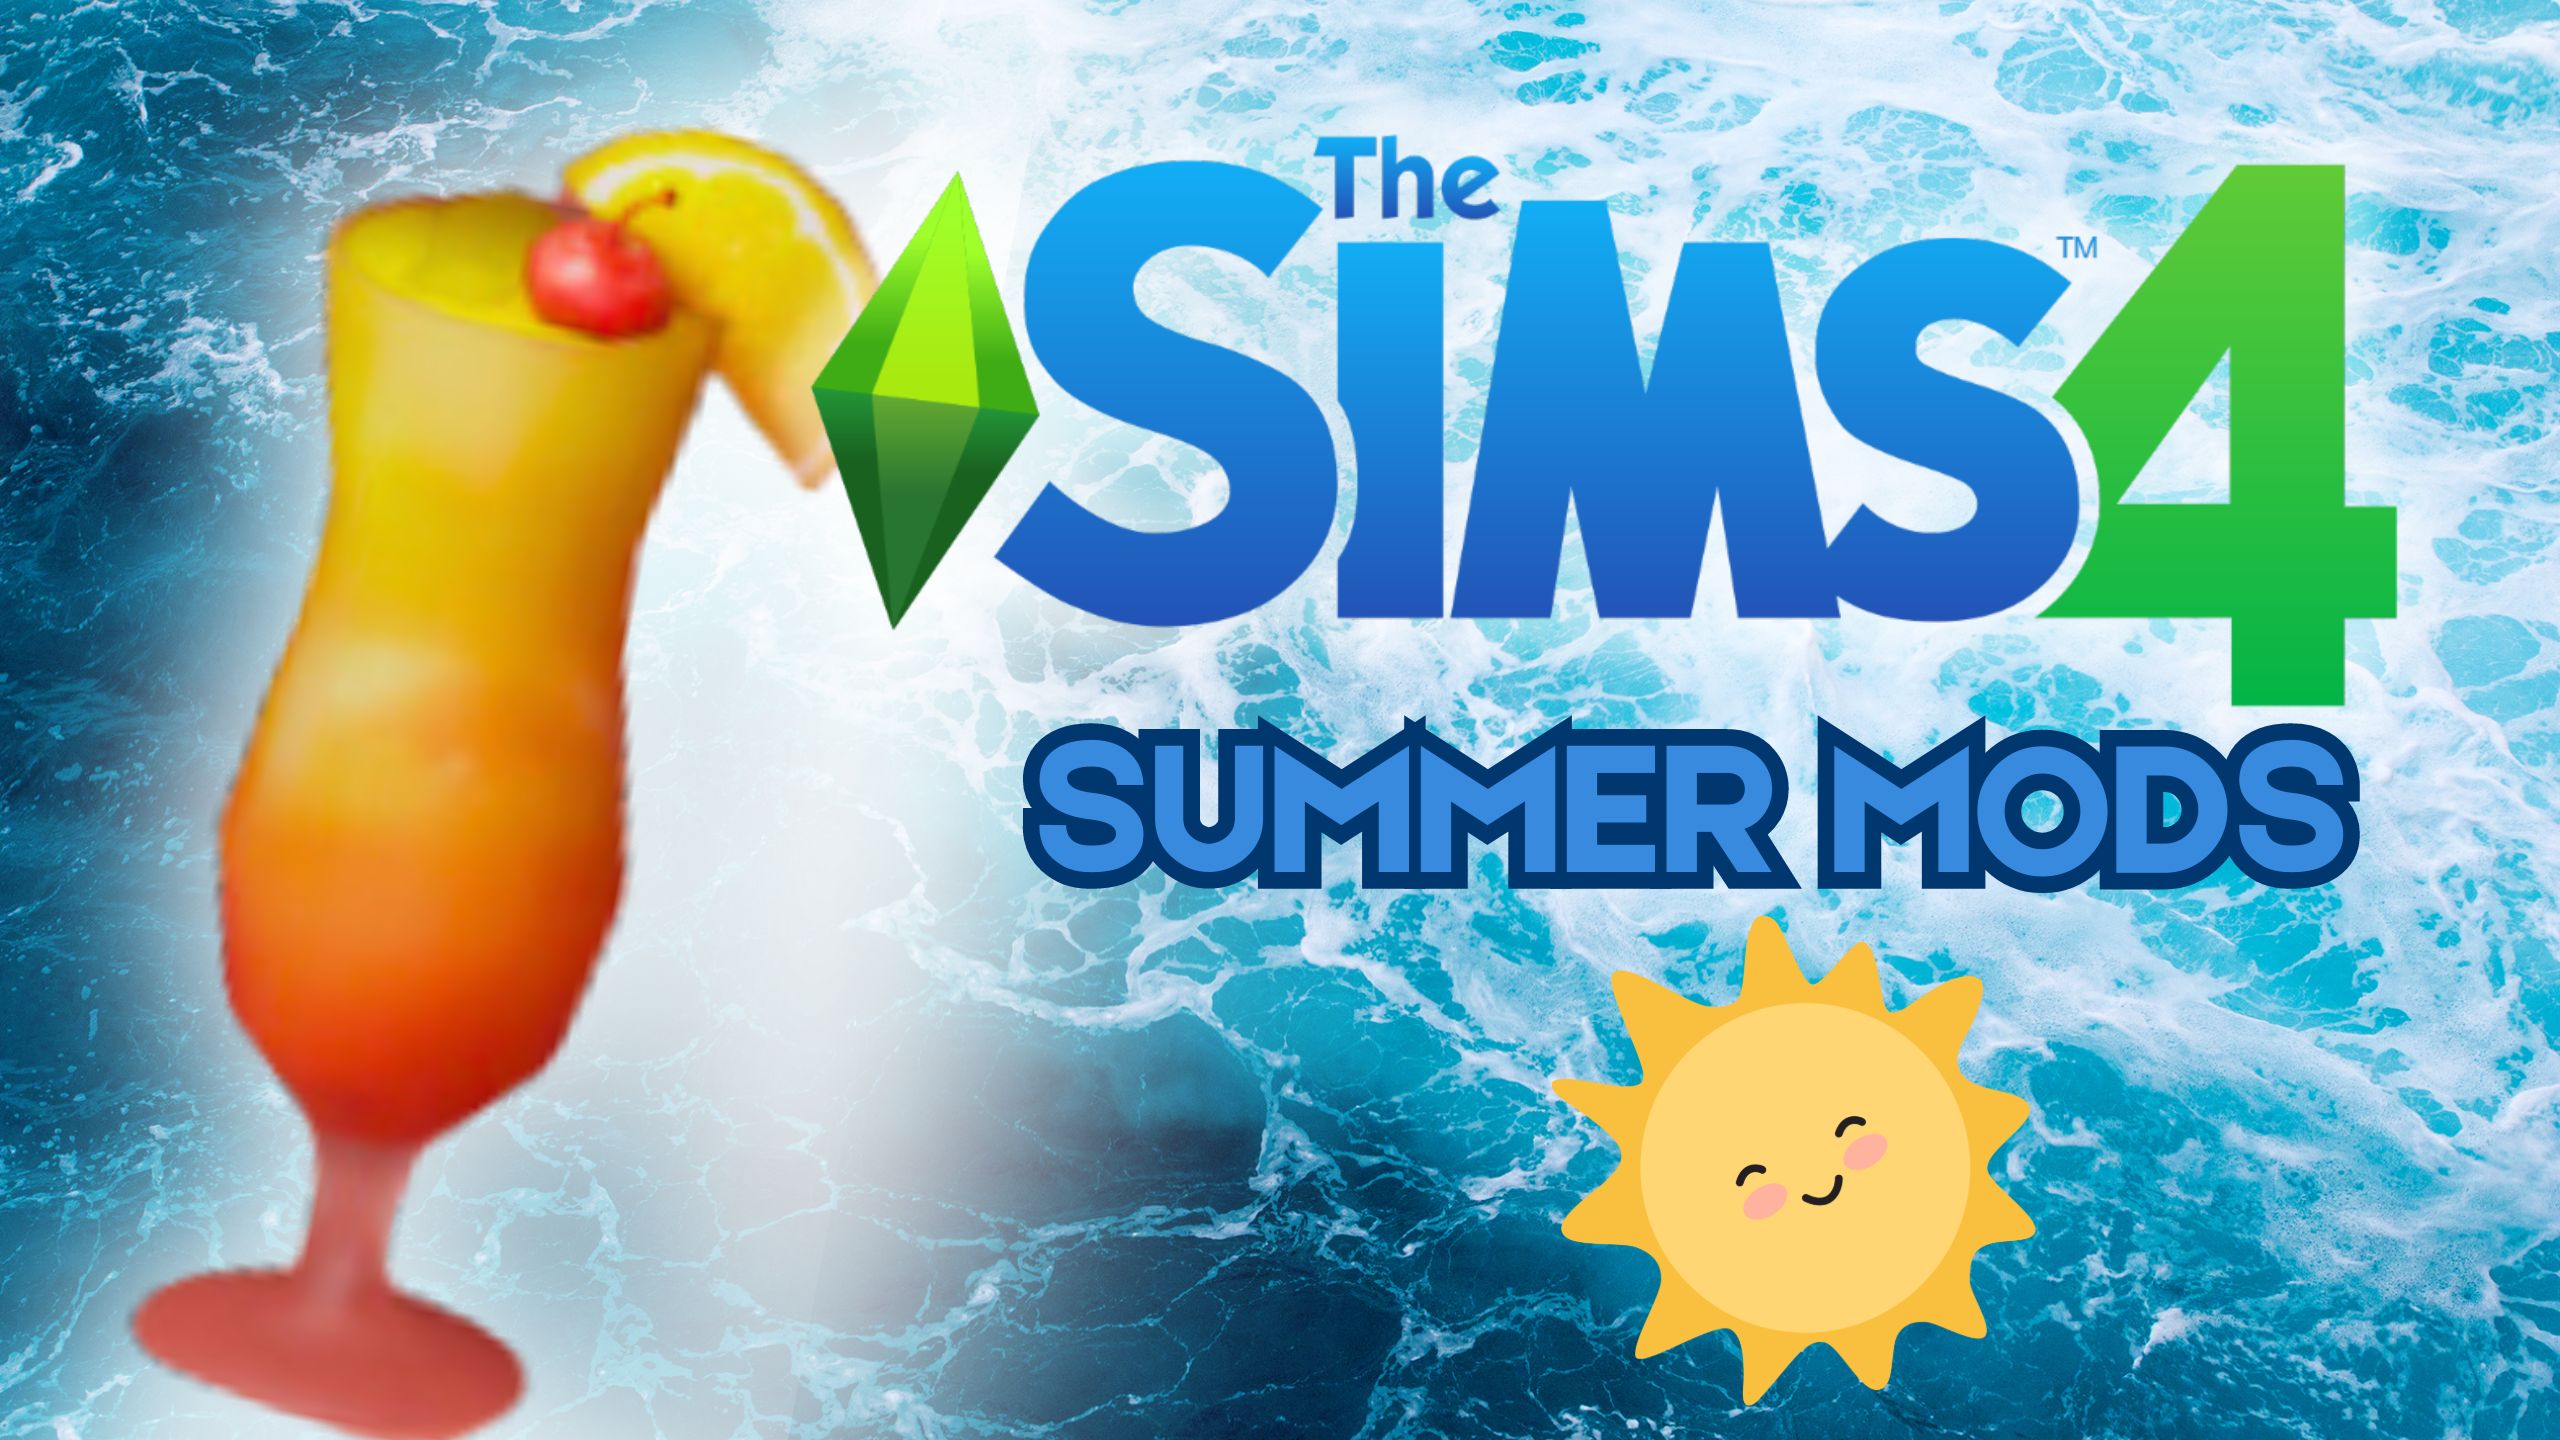 The Sims 4 Summer Mods - A refreshing cocktail drink with a cherry and orange slice on the rim, set against a vibrant blue water background with The Sims 4 logo and a cheerful sun icon, promoting summer-themed mods.